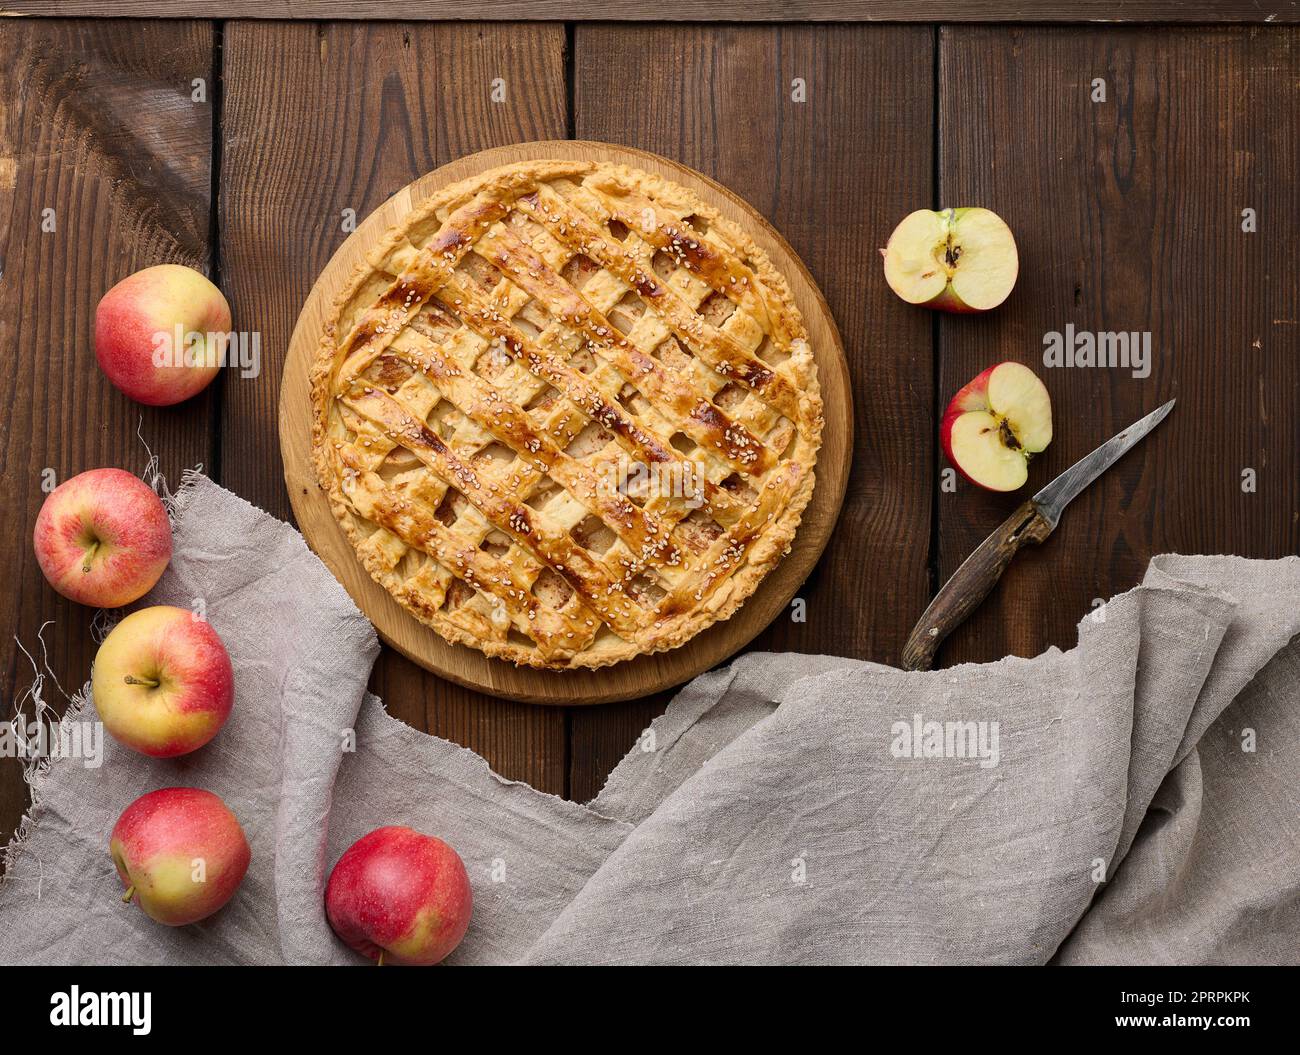 Round baked apple pie on a brown wooden table, top view Stock Photo